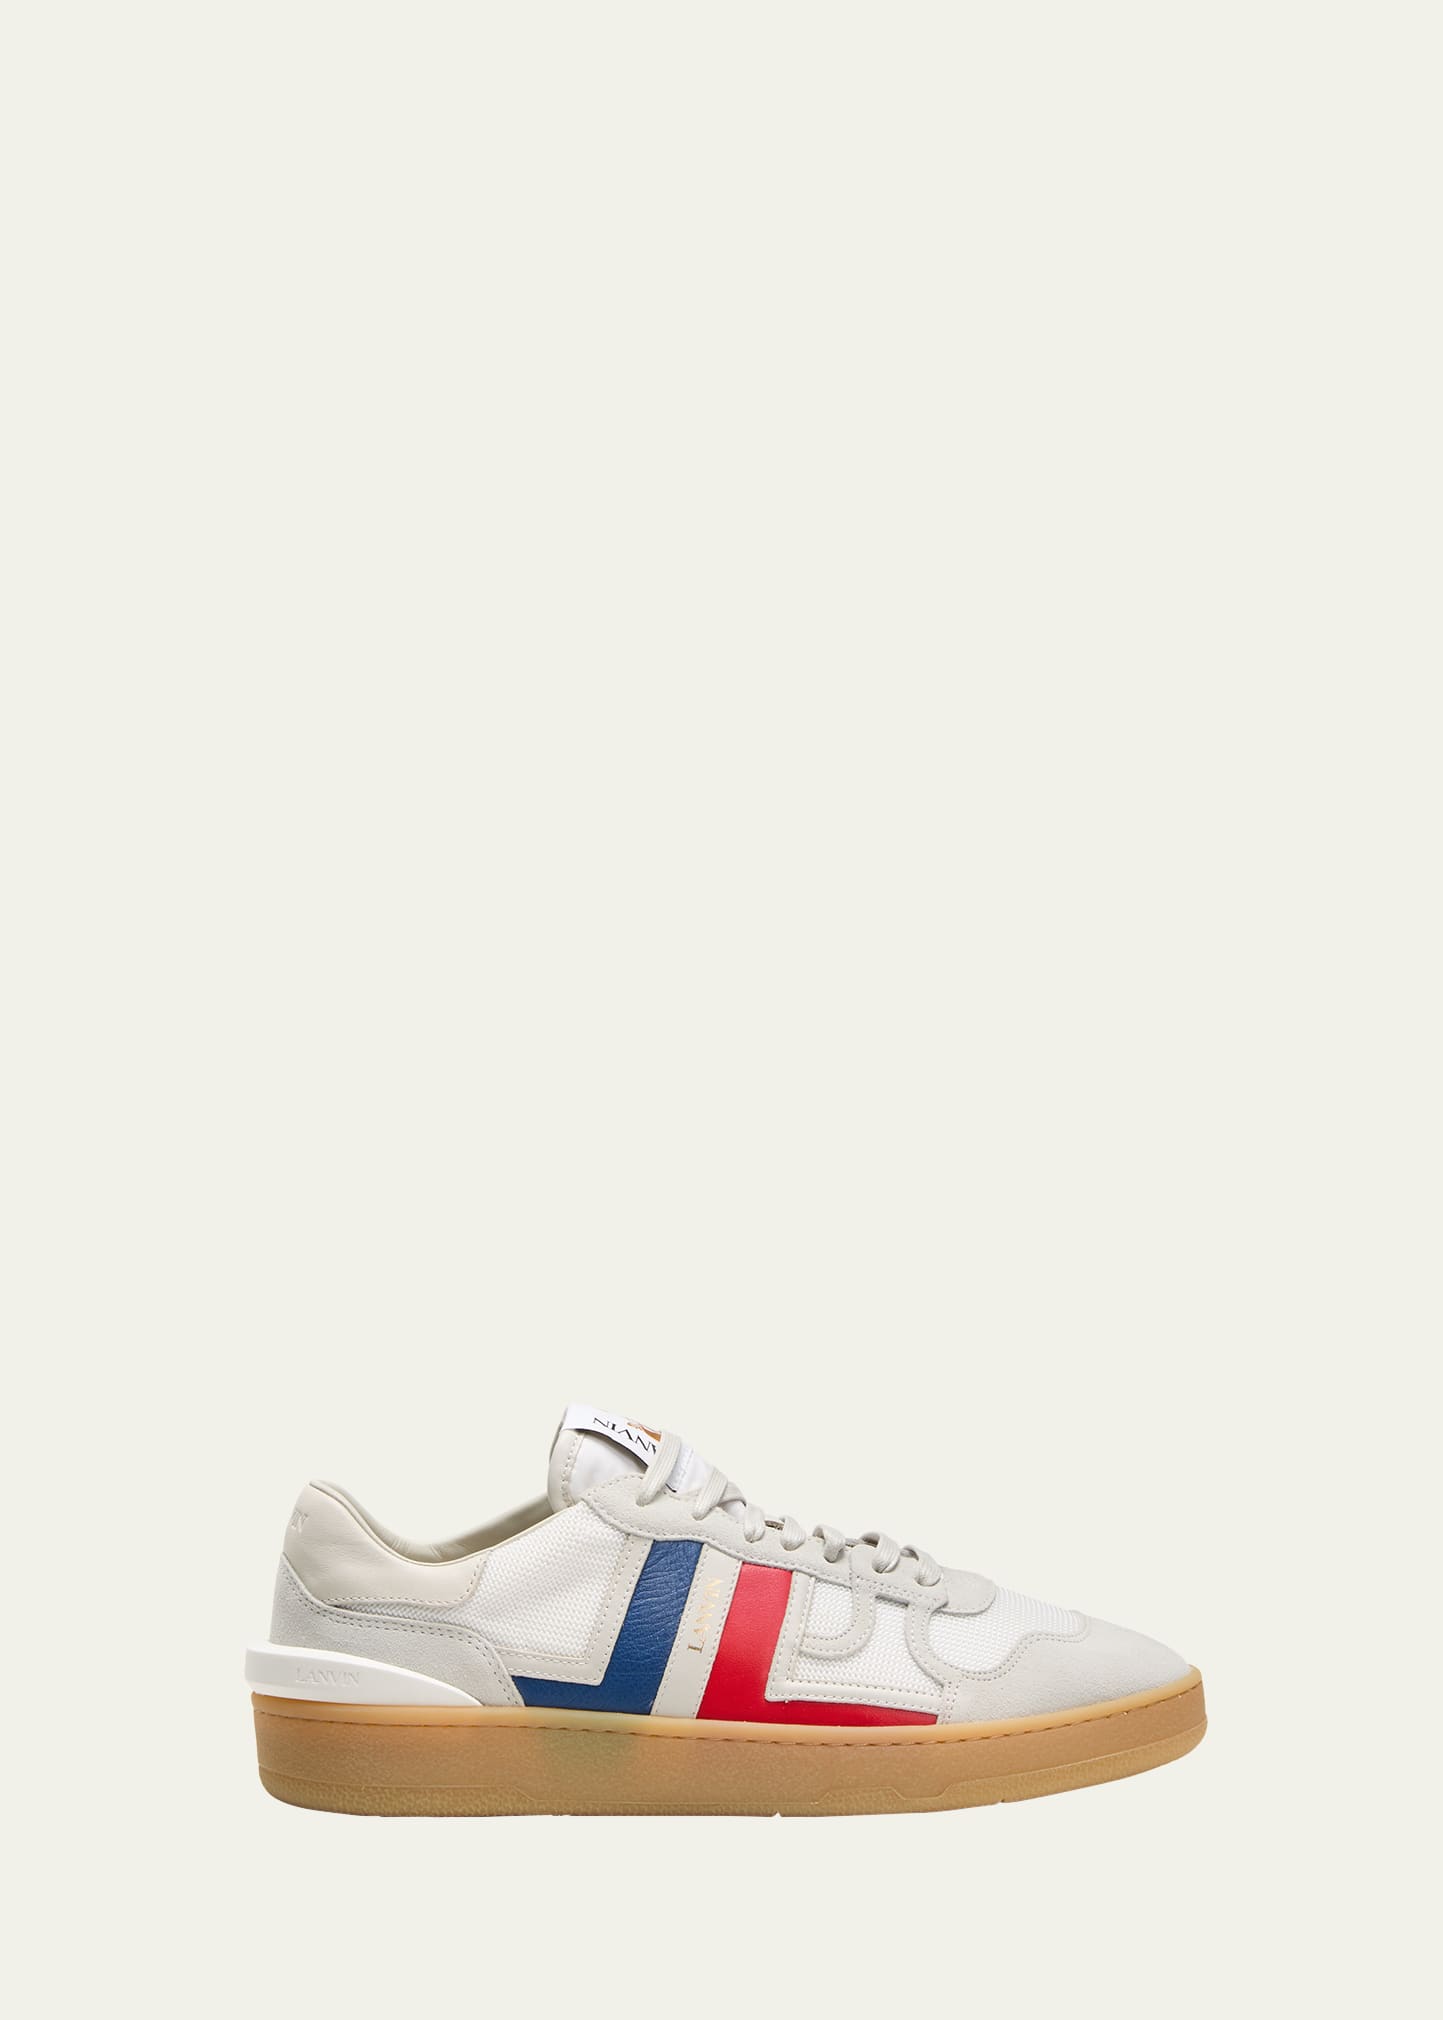 Shop Lanvin Men's Clay Textile And Leather Low-top Sneakers In White/blue/red